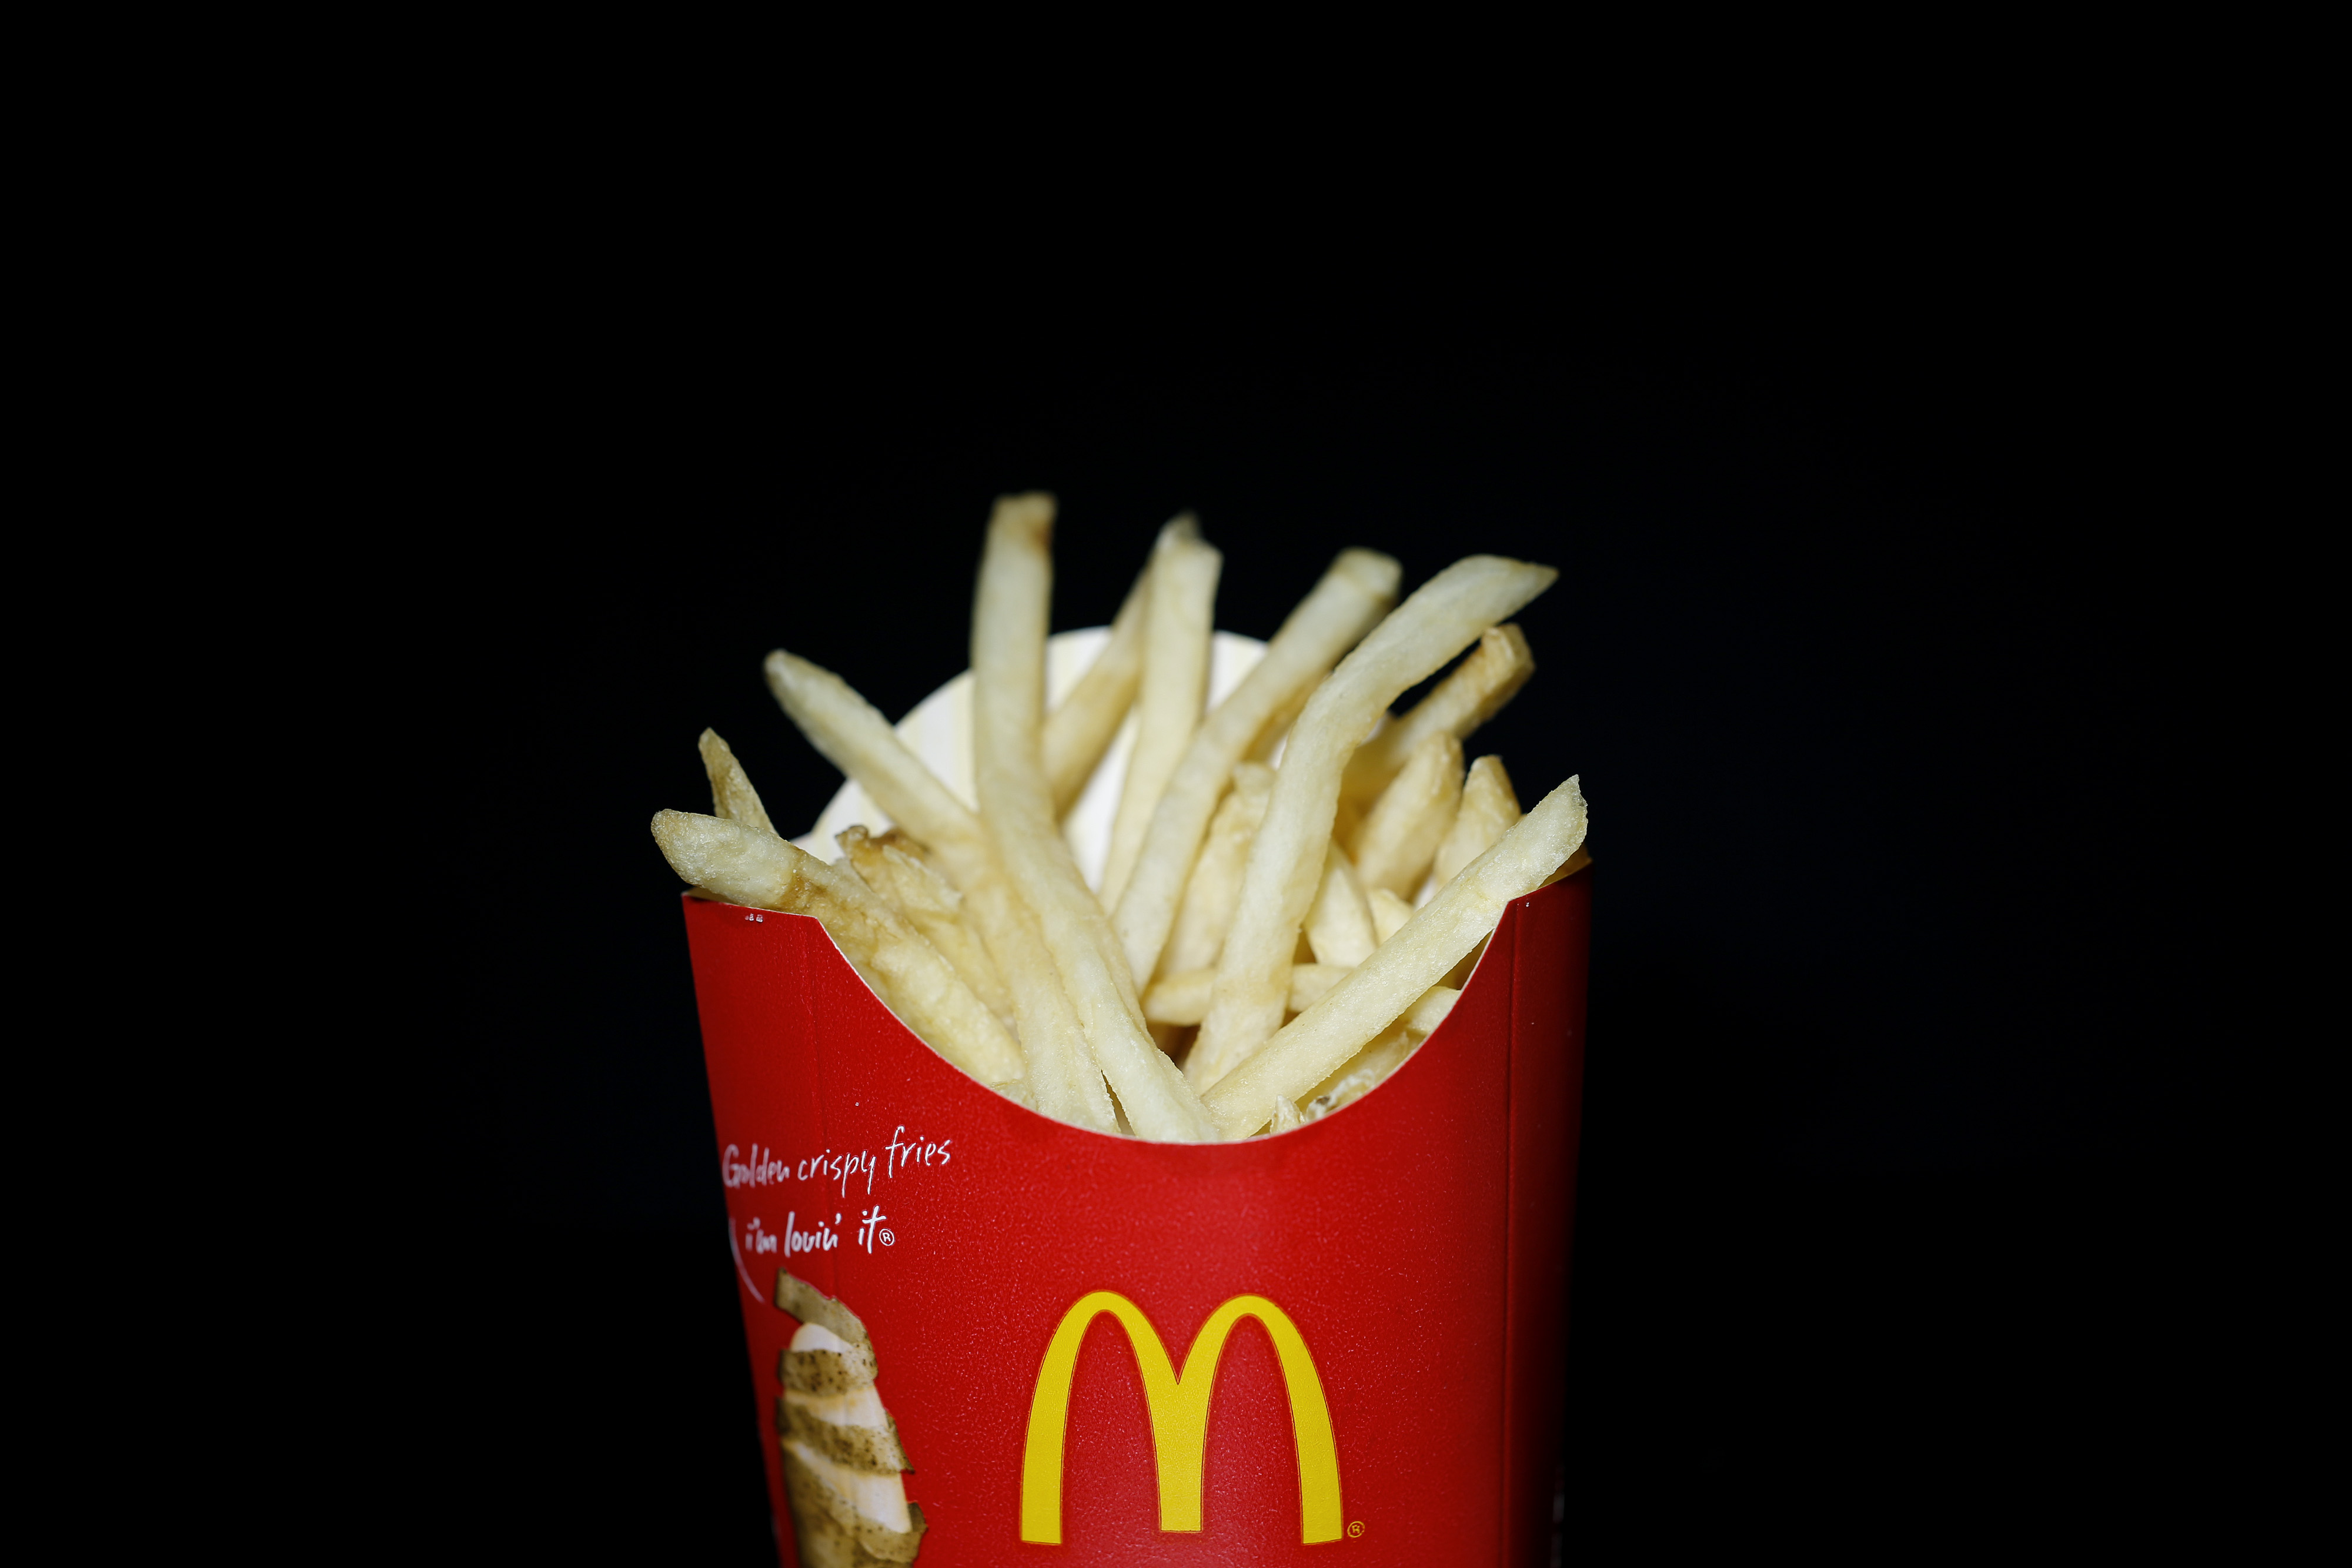 McDonald's french fries.